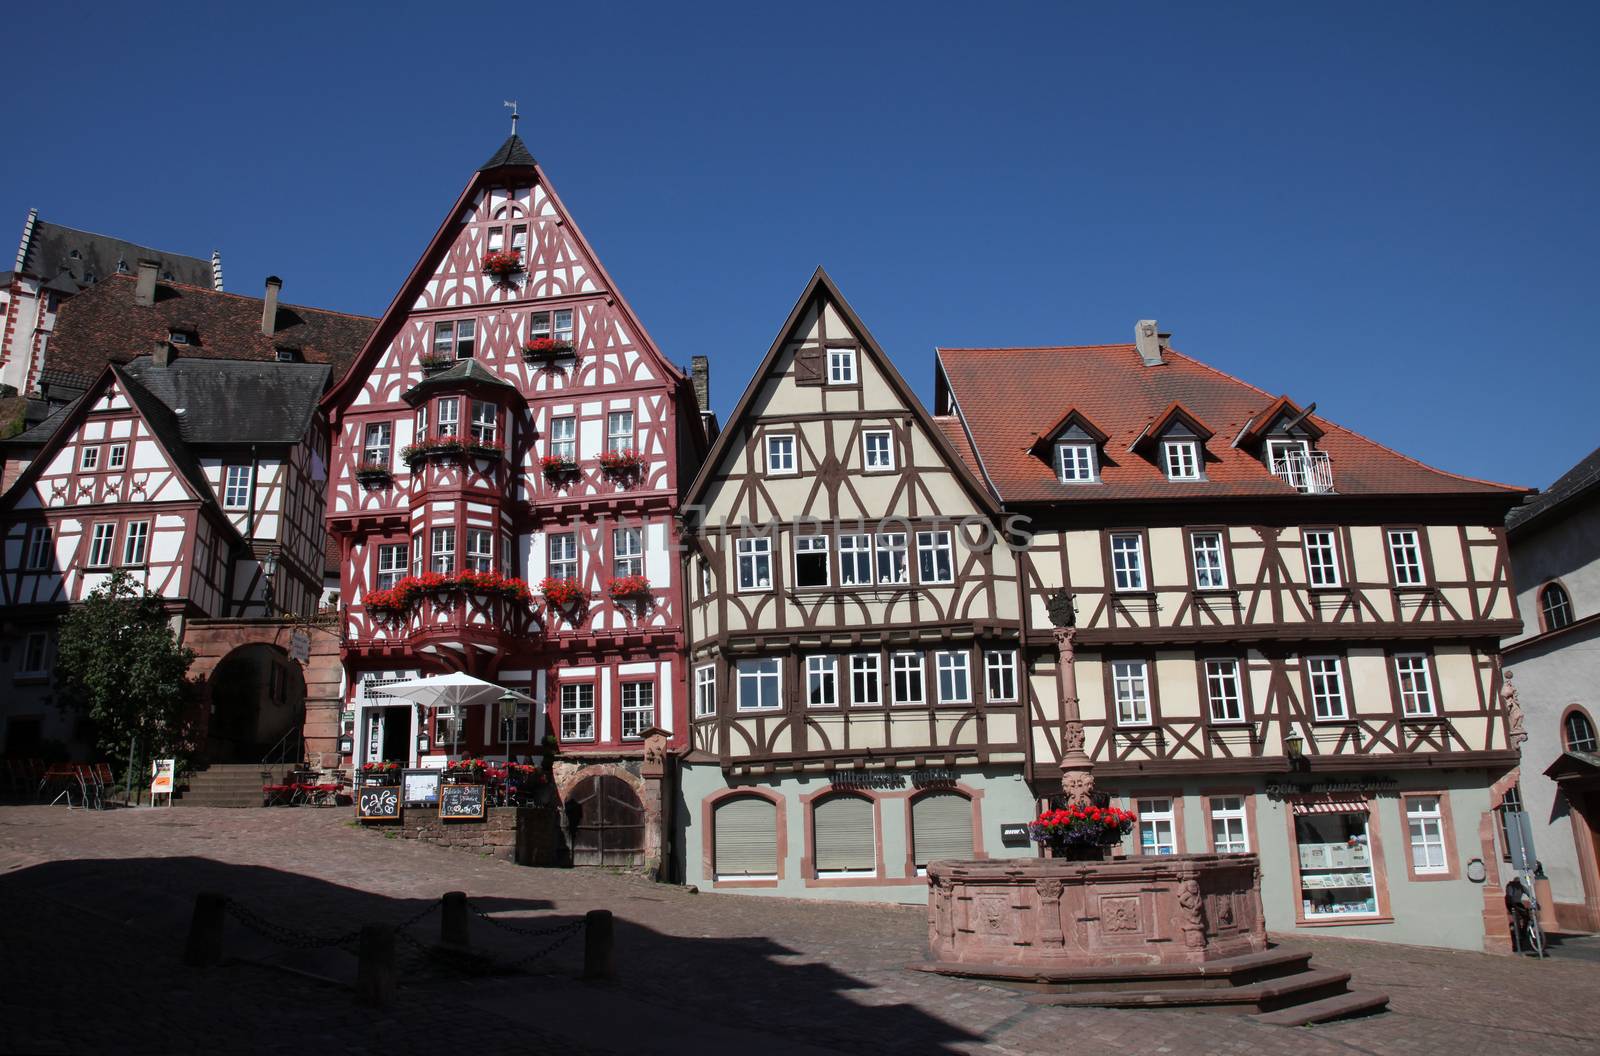 Half-timbered old houses in Miltenberg, Germany